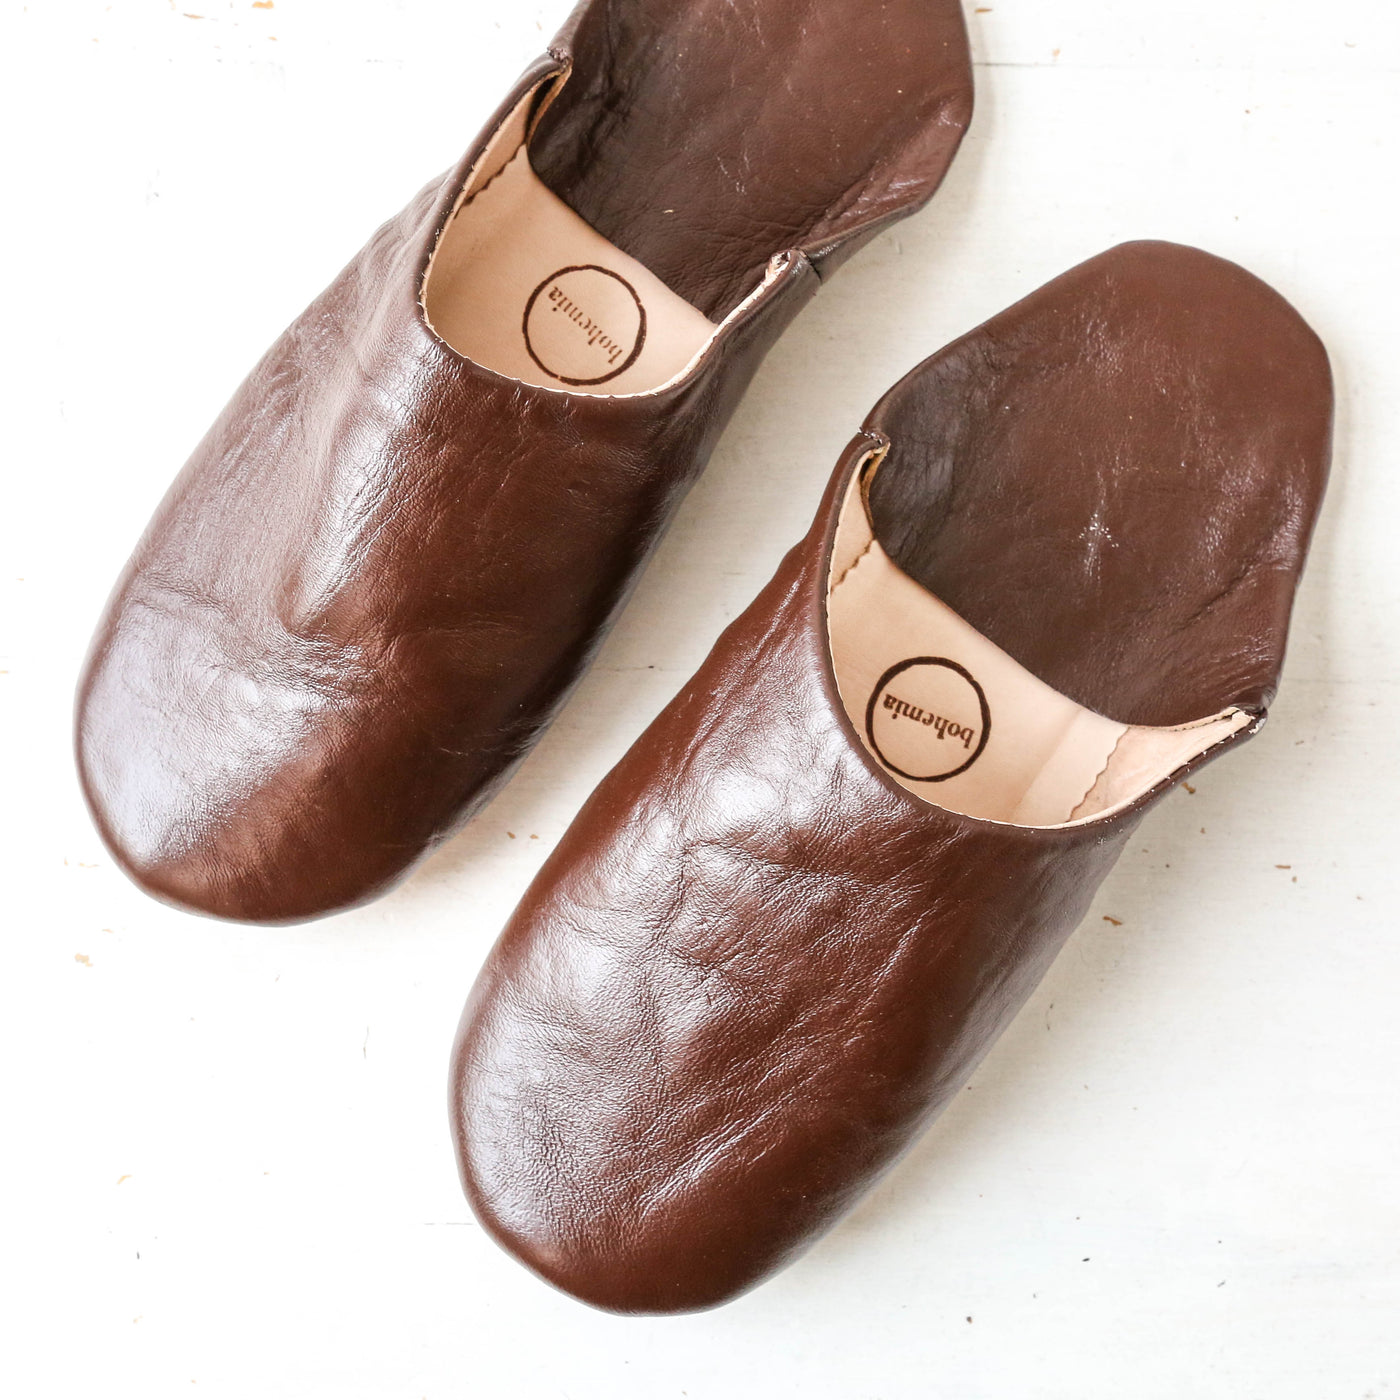 Men's Moroccan Leather Babouche Slippers - Chocolate